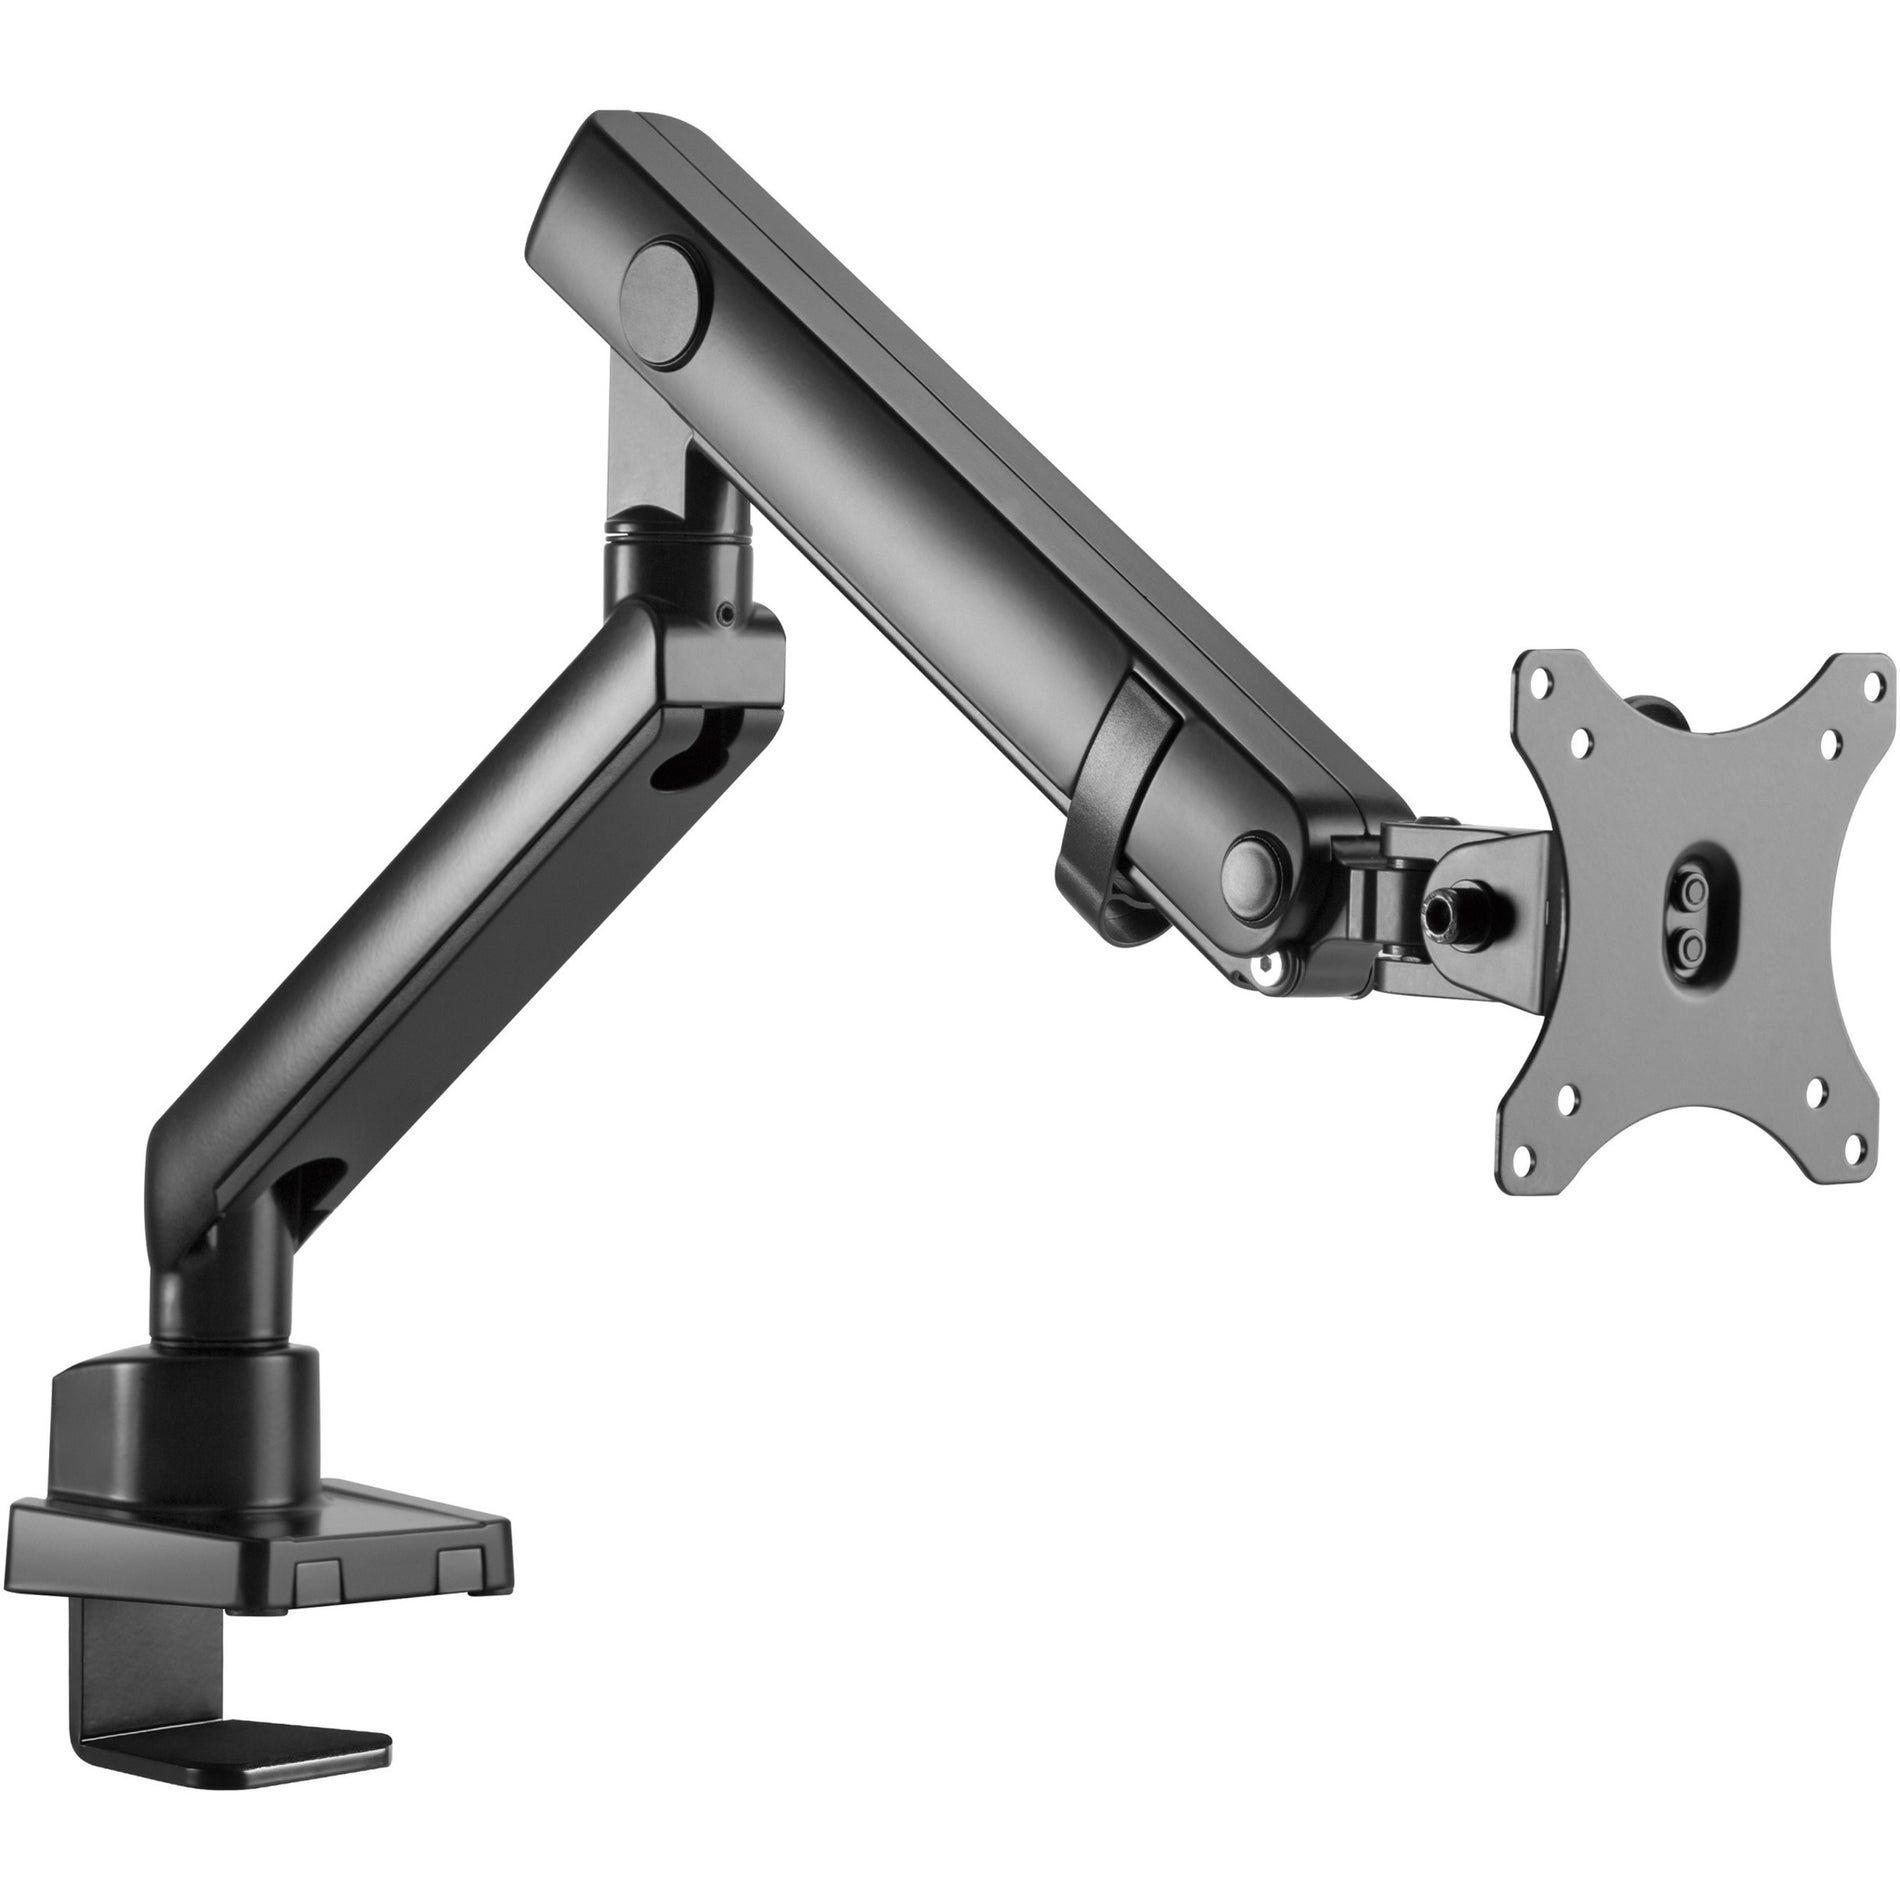 Amer Mounting Arm for Curved Screen Display, Flat Panel Display - Matte Black (HYDRA1B) Front image